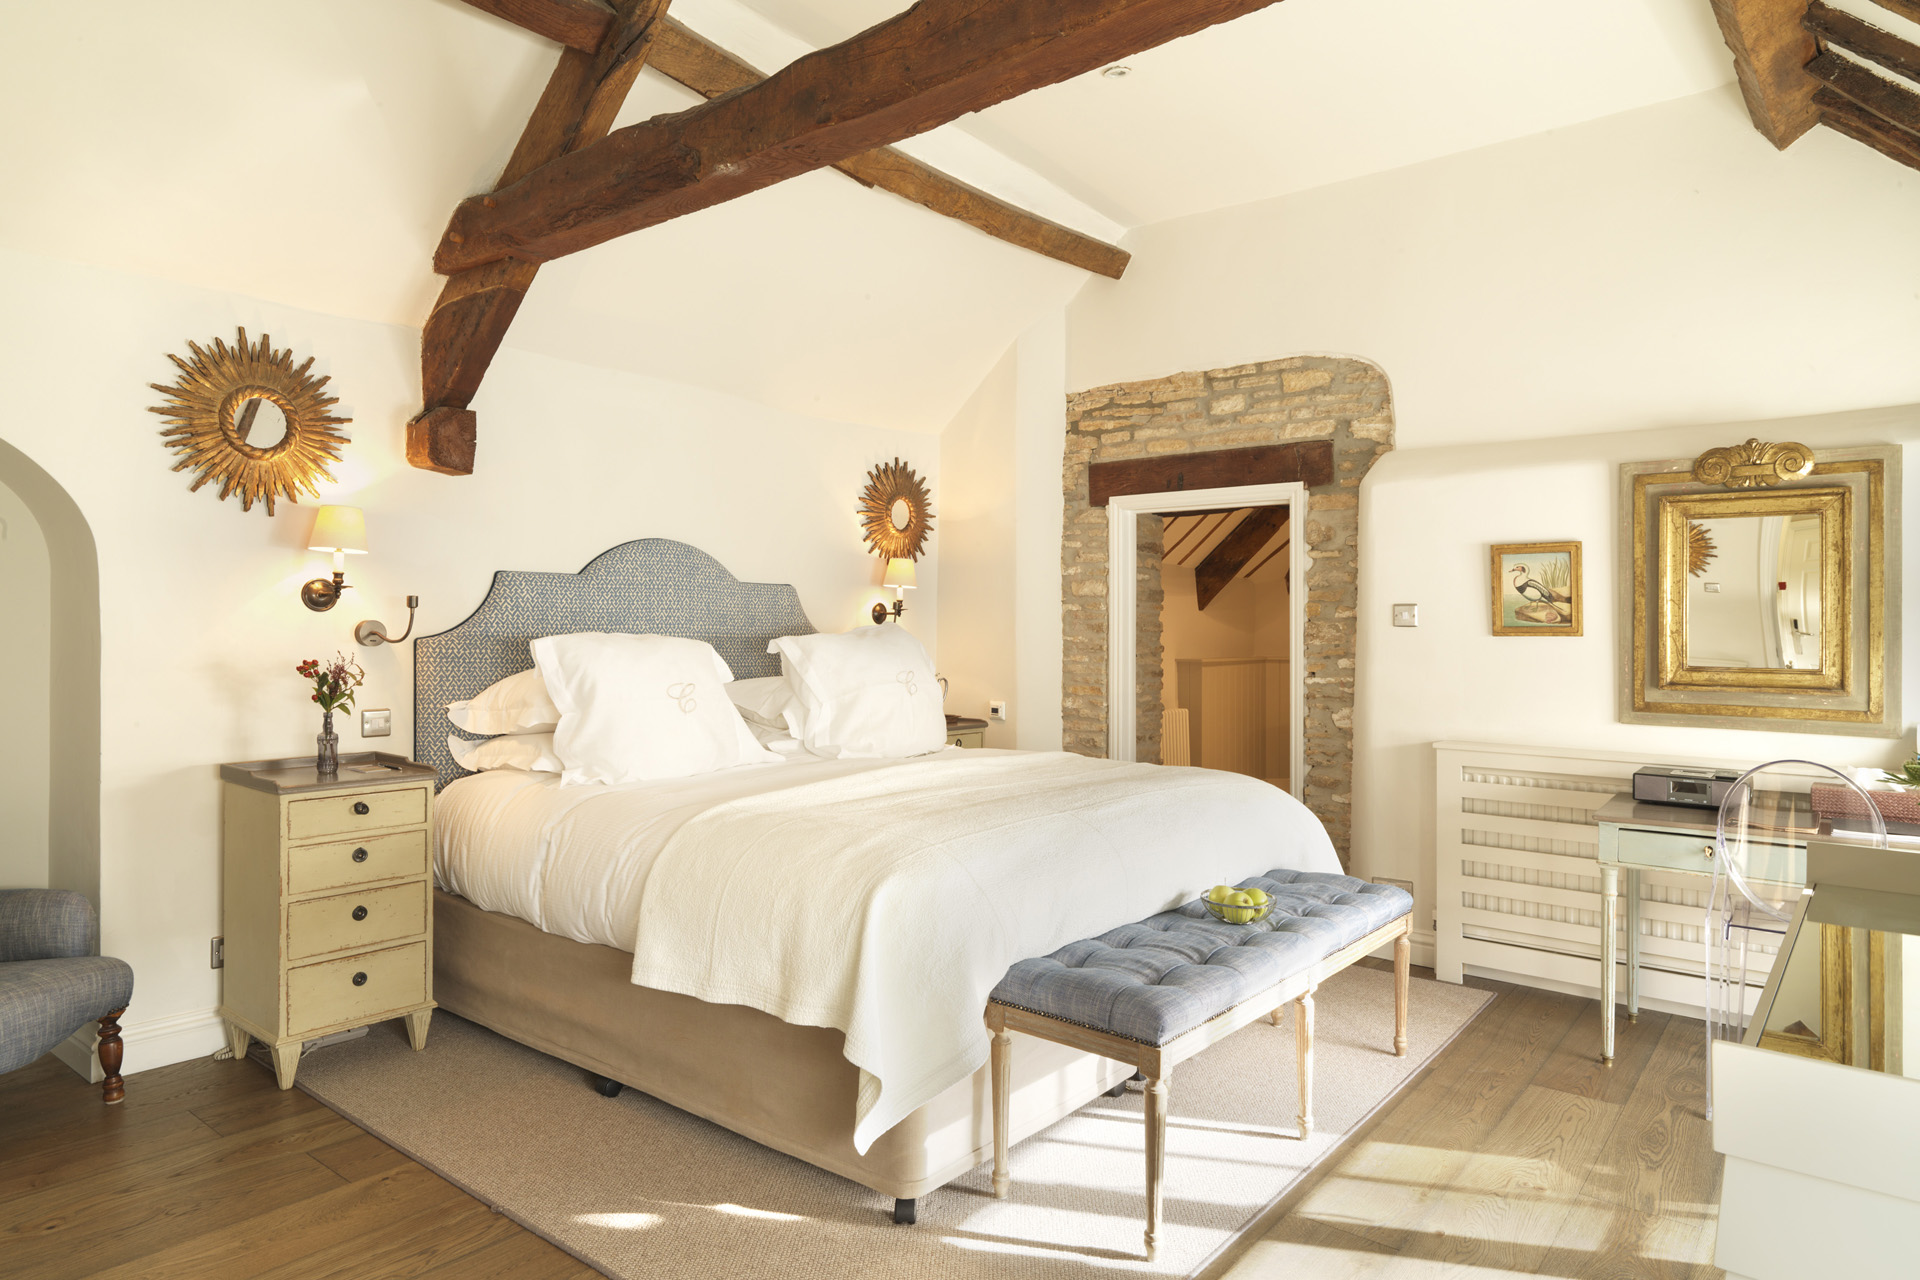 A light filled bedroom with beams